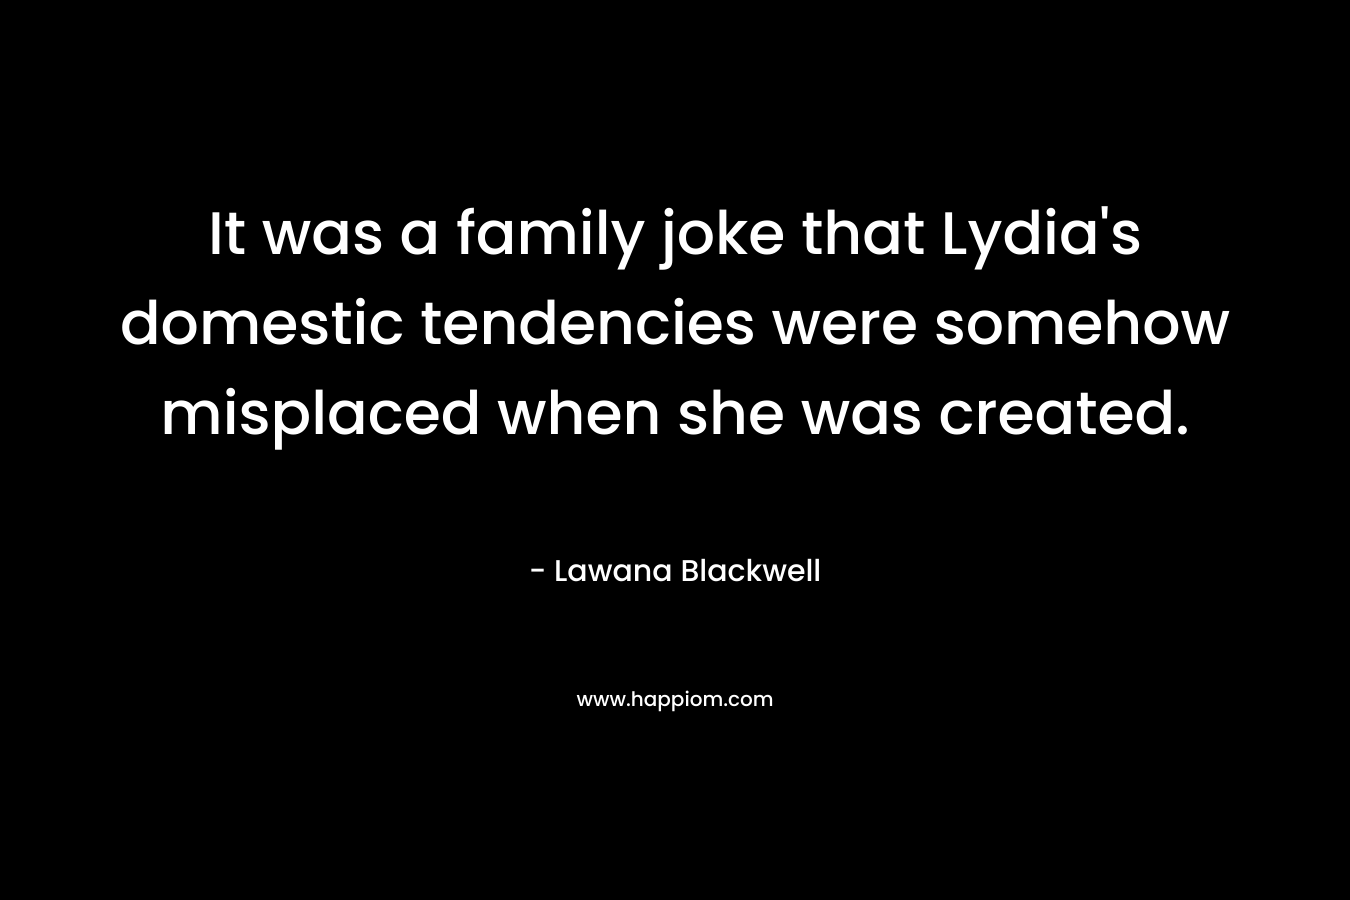 It was a family joke that Lydia’s domestic tendencies were somehow misplaced when she was created. – Lawana Blackwell